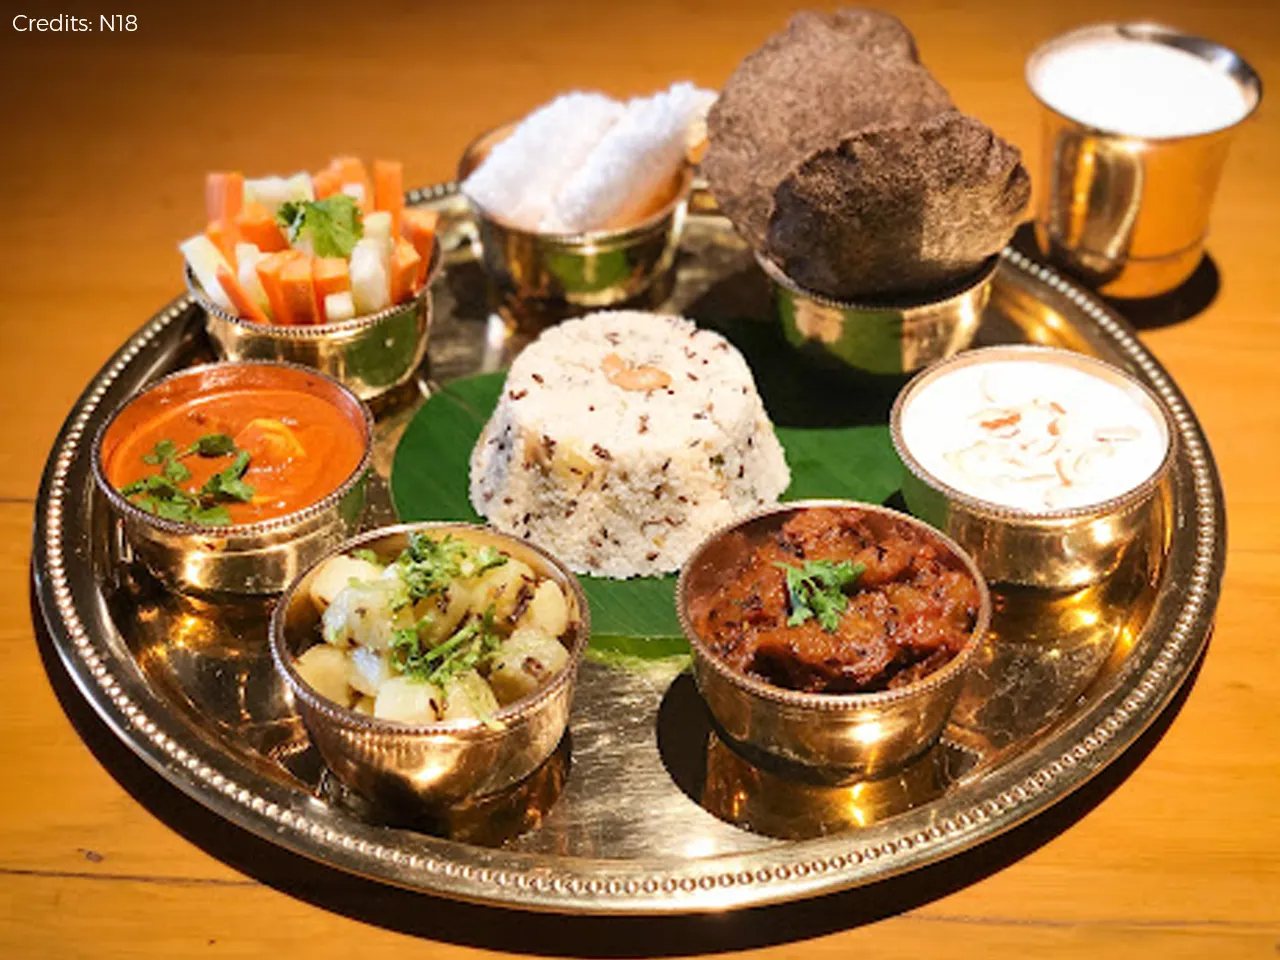 Authentic food for Navratri: 8 spots to get a Navratri thali in Mumbai